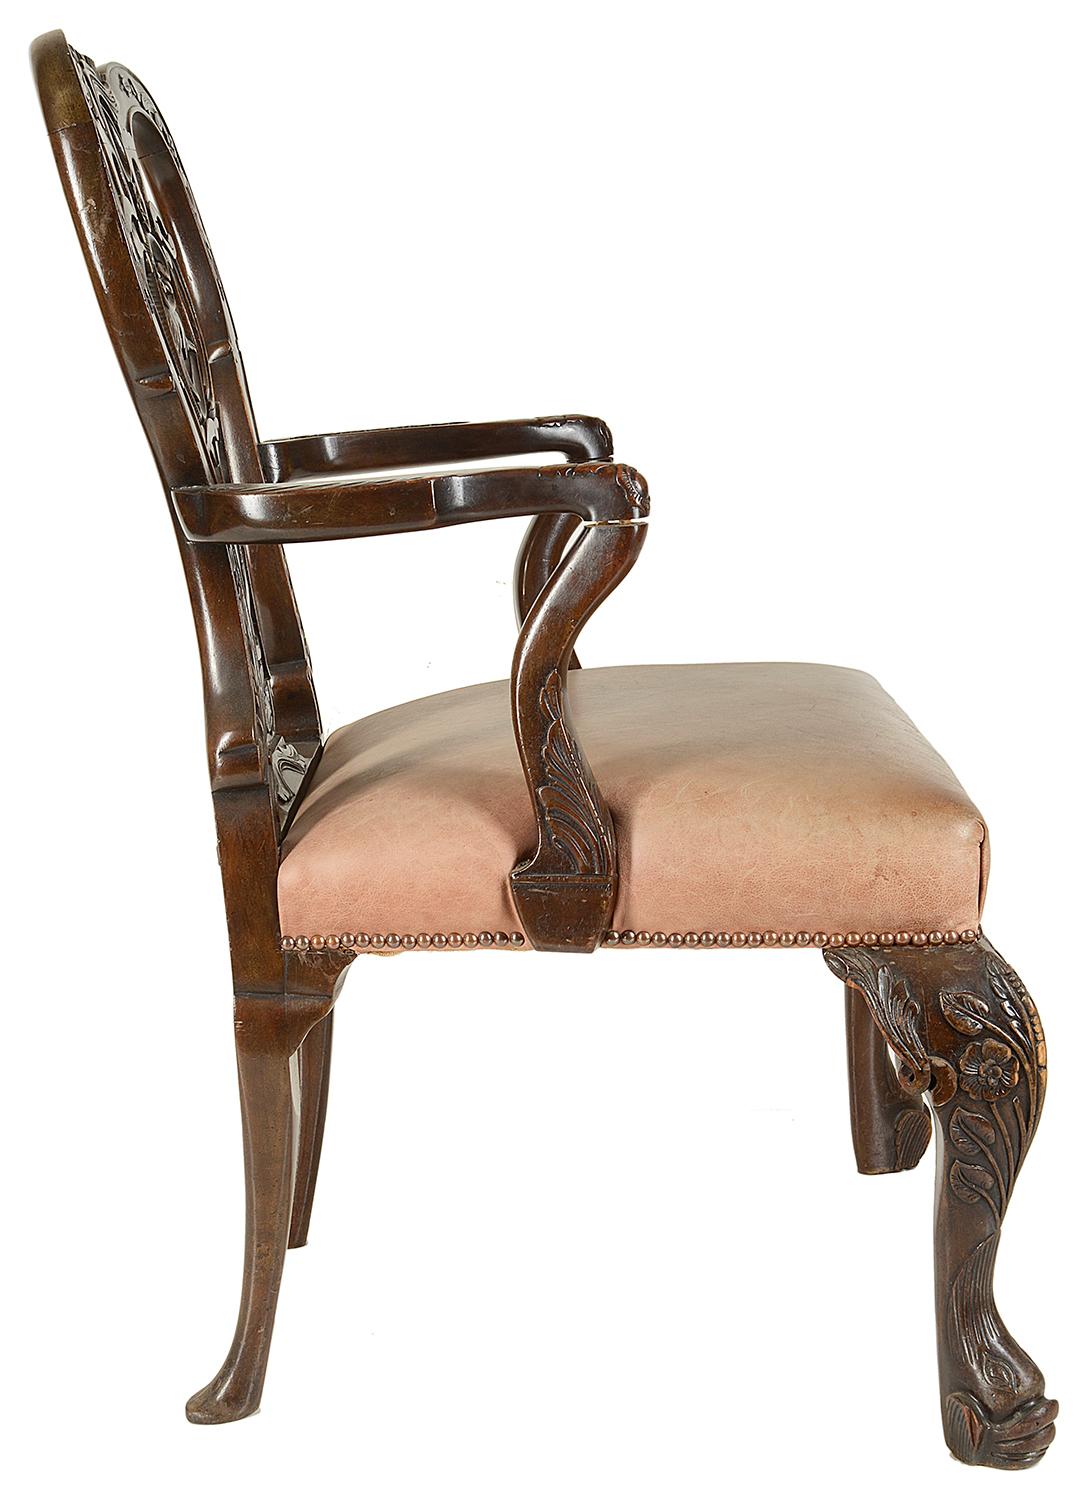 English 19th Century, Chippendale Influenced Desk Chair For Sale